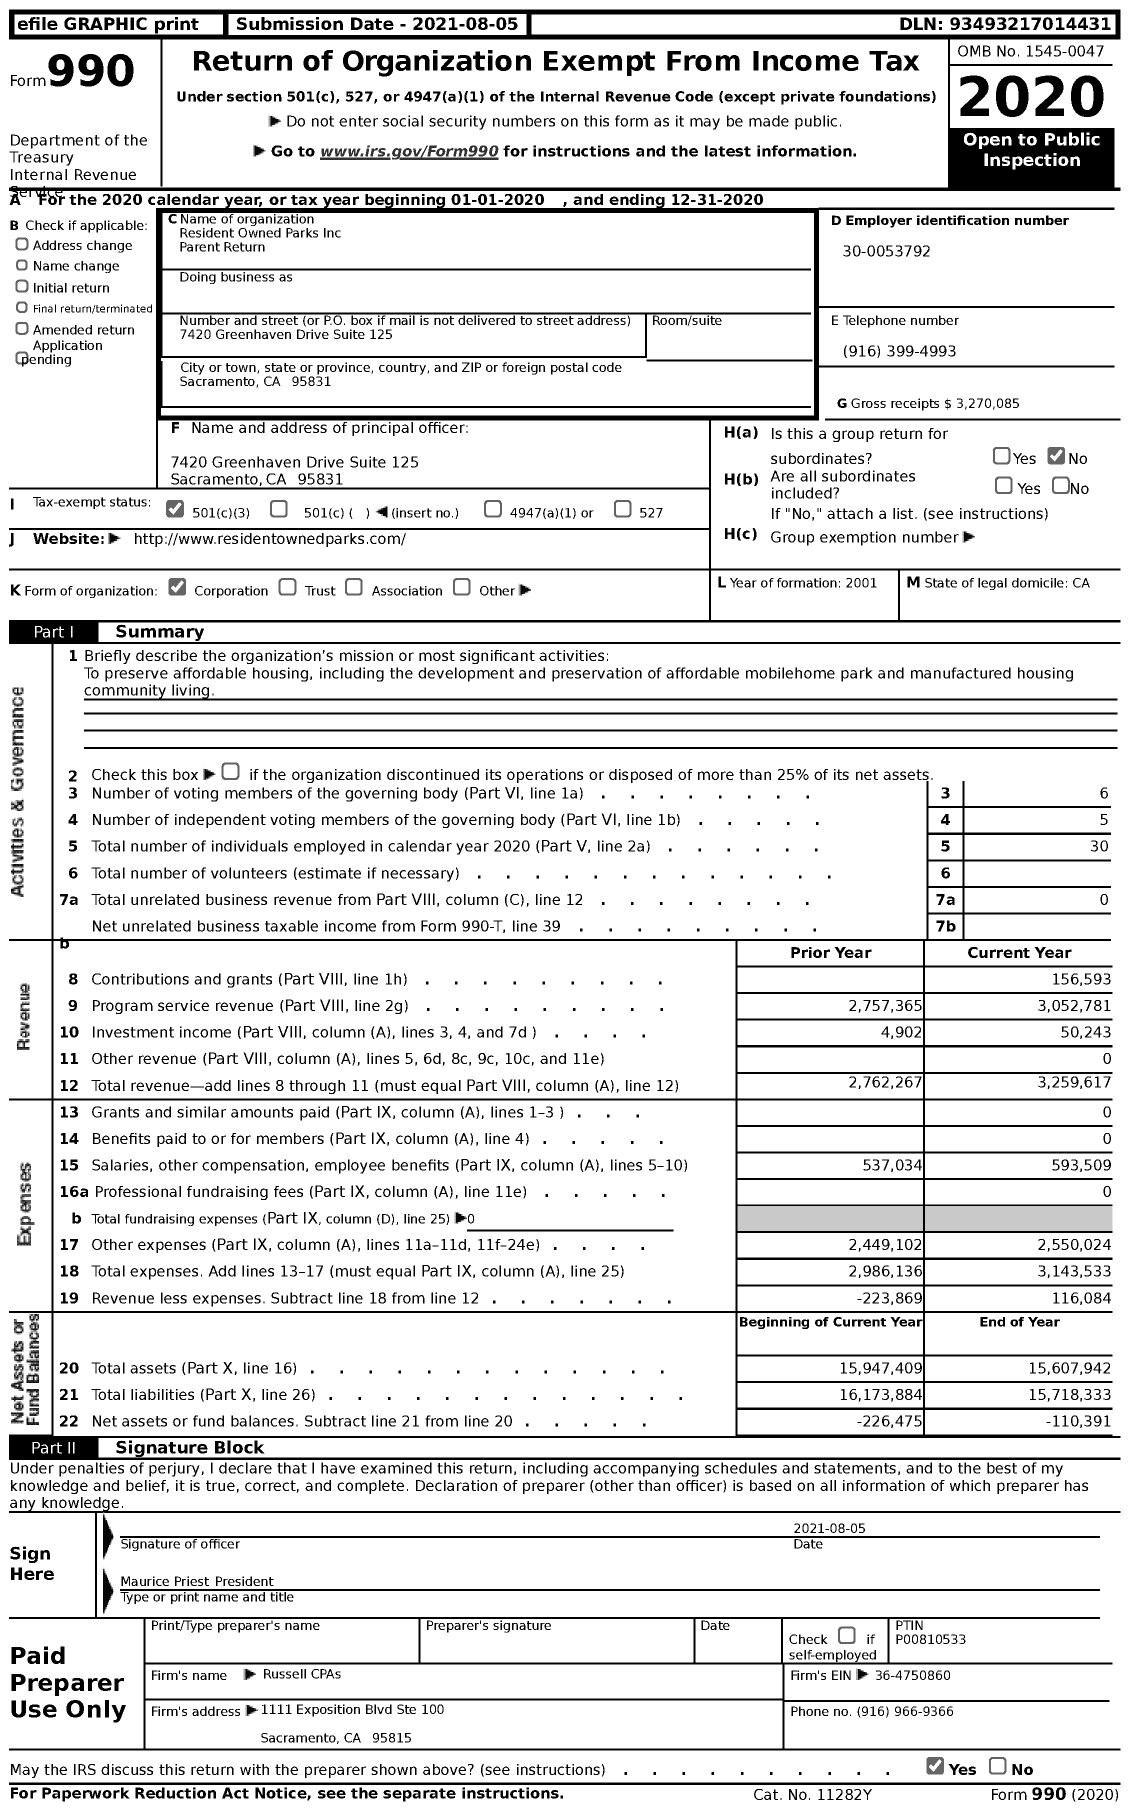 Image of first page of 2020 Form 990 for Resident Owned Parks Inc Parent Return (ROP)